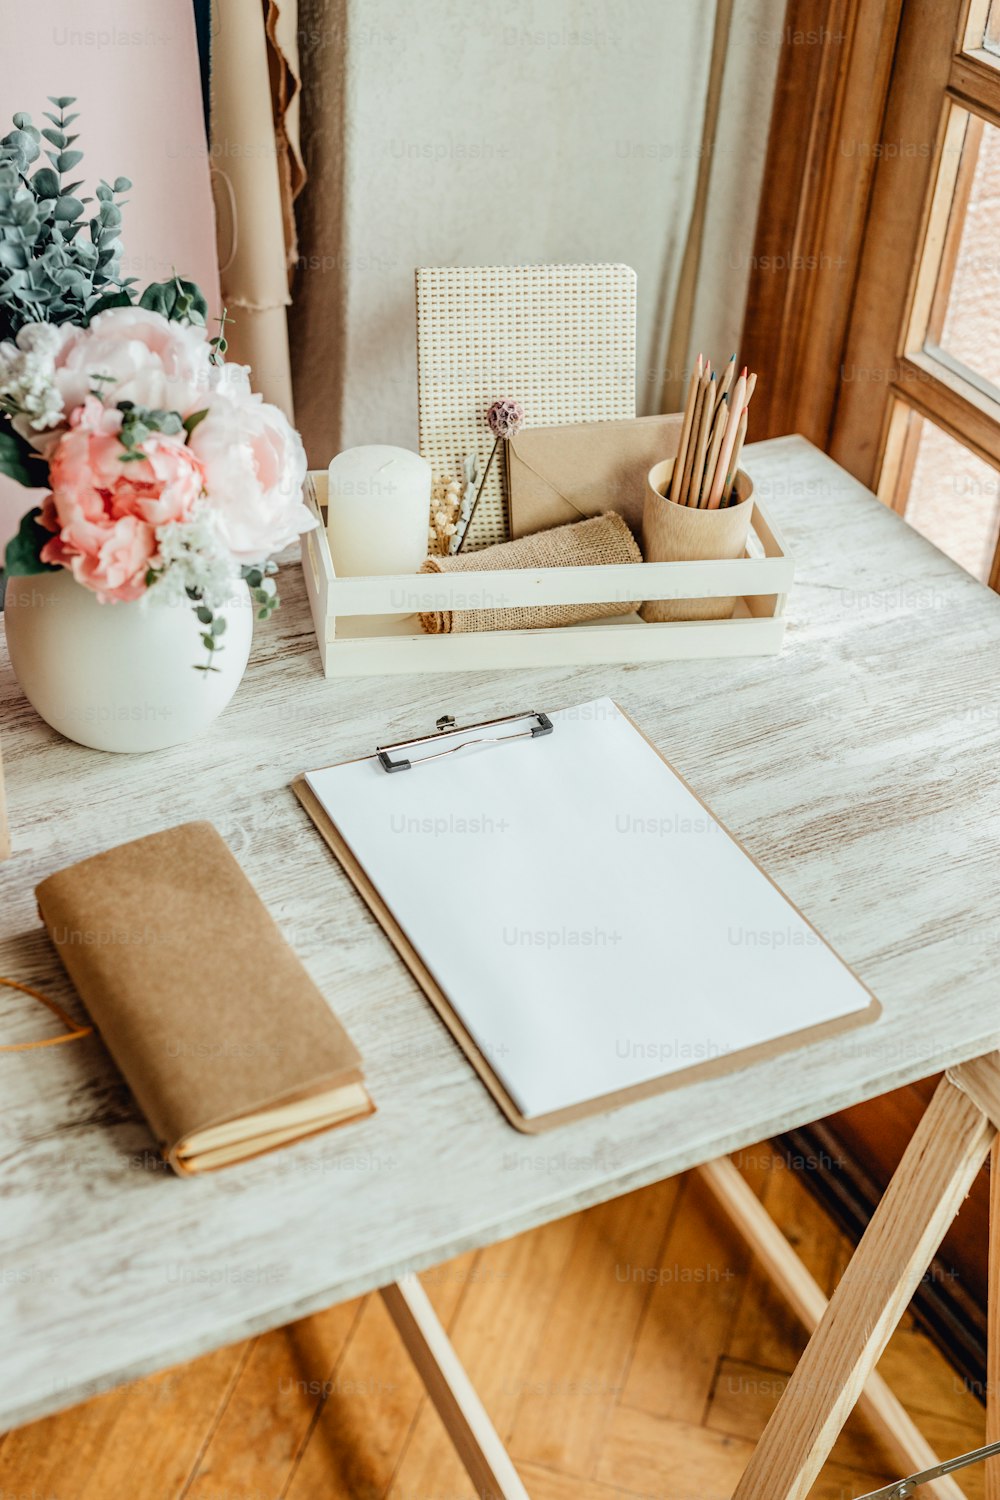 a wooden table topped with a notebook and flowers